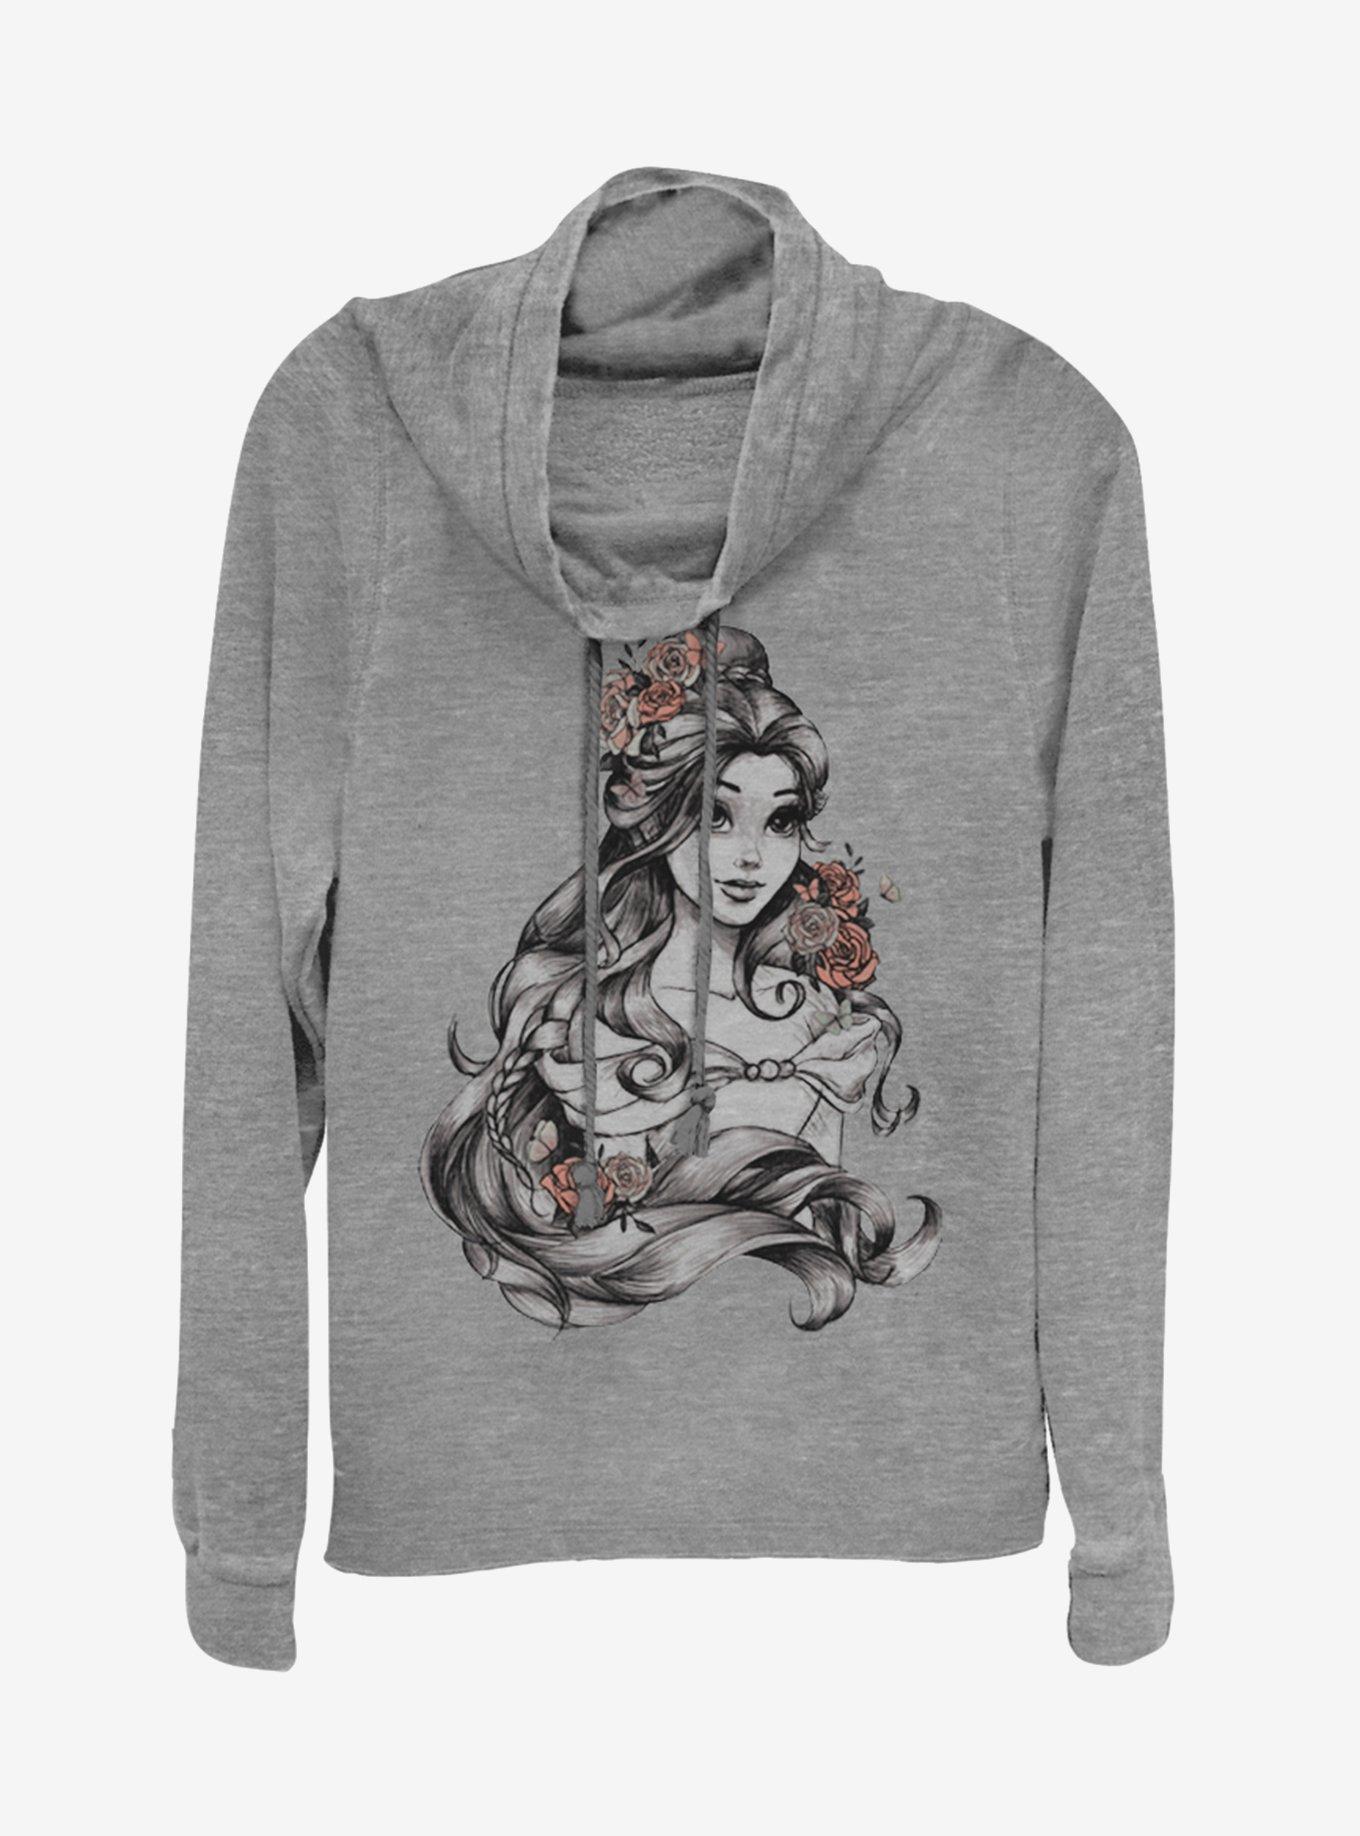 Disney Beauty and the Beast Beaute Flower Cowlneck Long-Sleeve Girls Top, GRAY HTR, hi-res